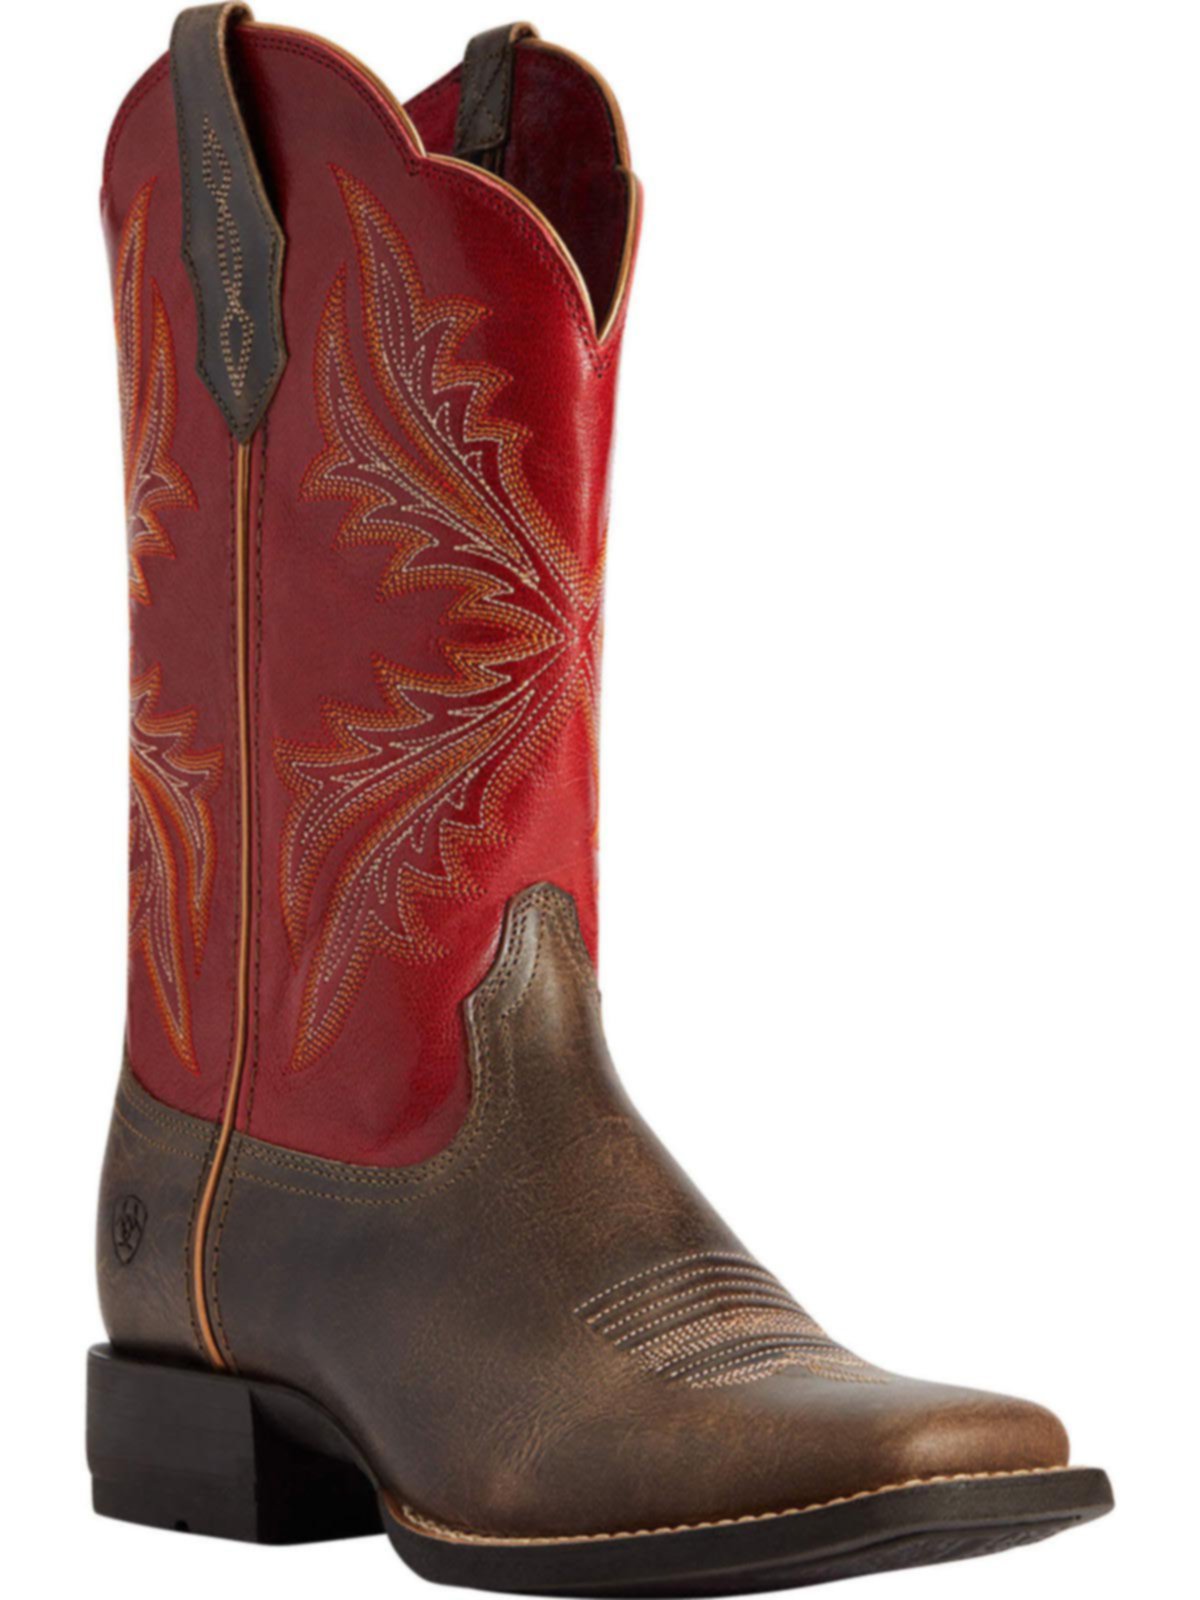 Shop Ariat Womens West Bound Boot 10040287 | Save 20% + Free Shipping ...